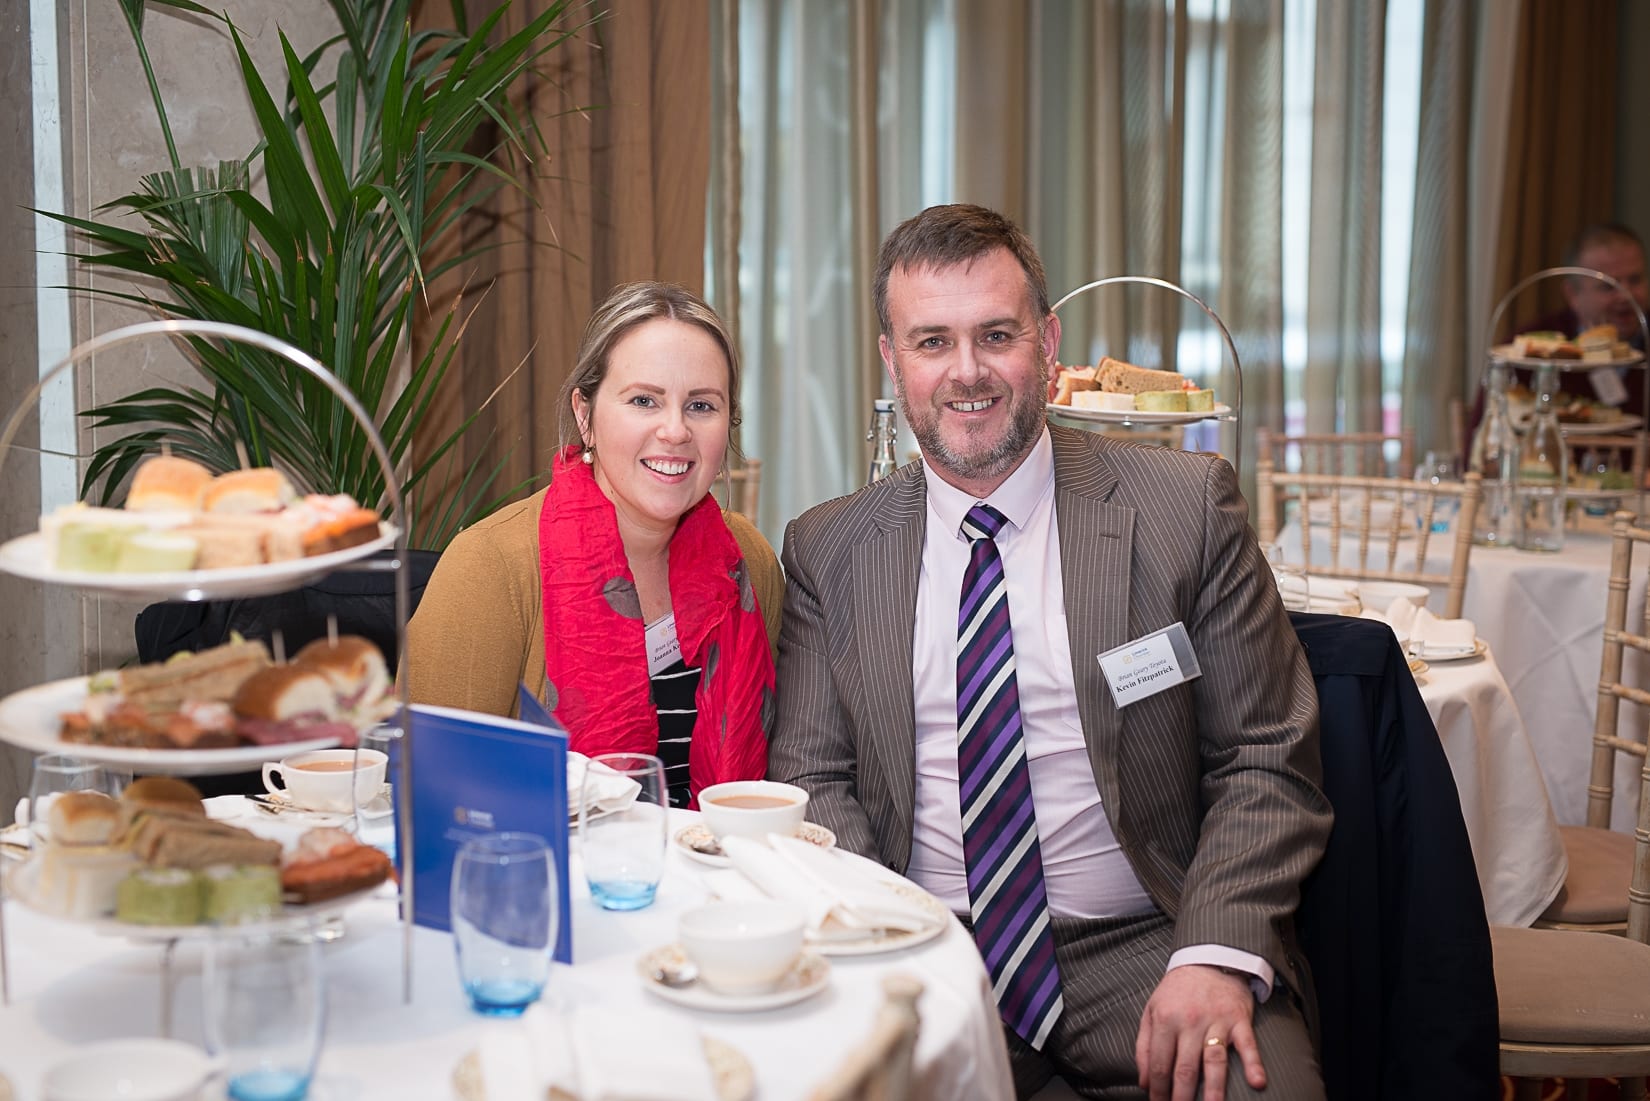 No repro fee- At the Limerick Chamber business briefing on ‘Spending Trends: Tourism, Retail &  Hospitality Industry Insights & Marketing Trends’ at the Savoy Hotel - 22-01-2019, From Left to Right: Joanne Kelleher and Kevin Fitzpatrick  both from Brian Geary Toyota
Photo credit Shauna Kennedy